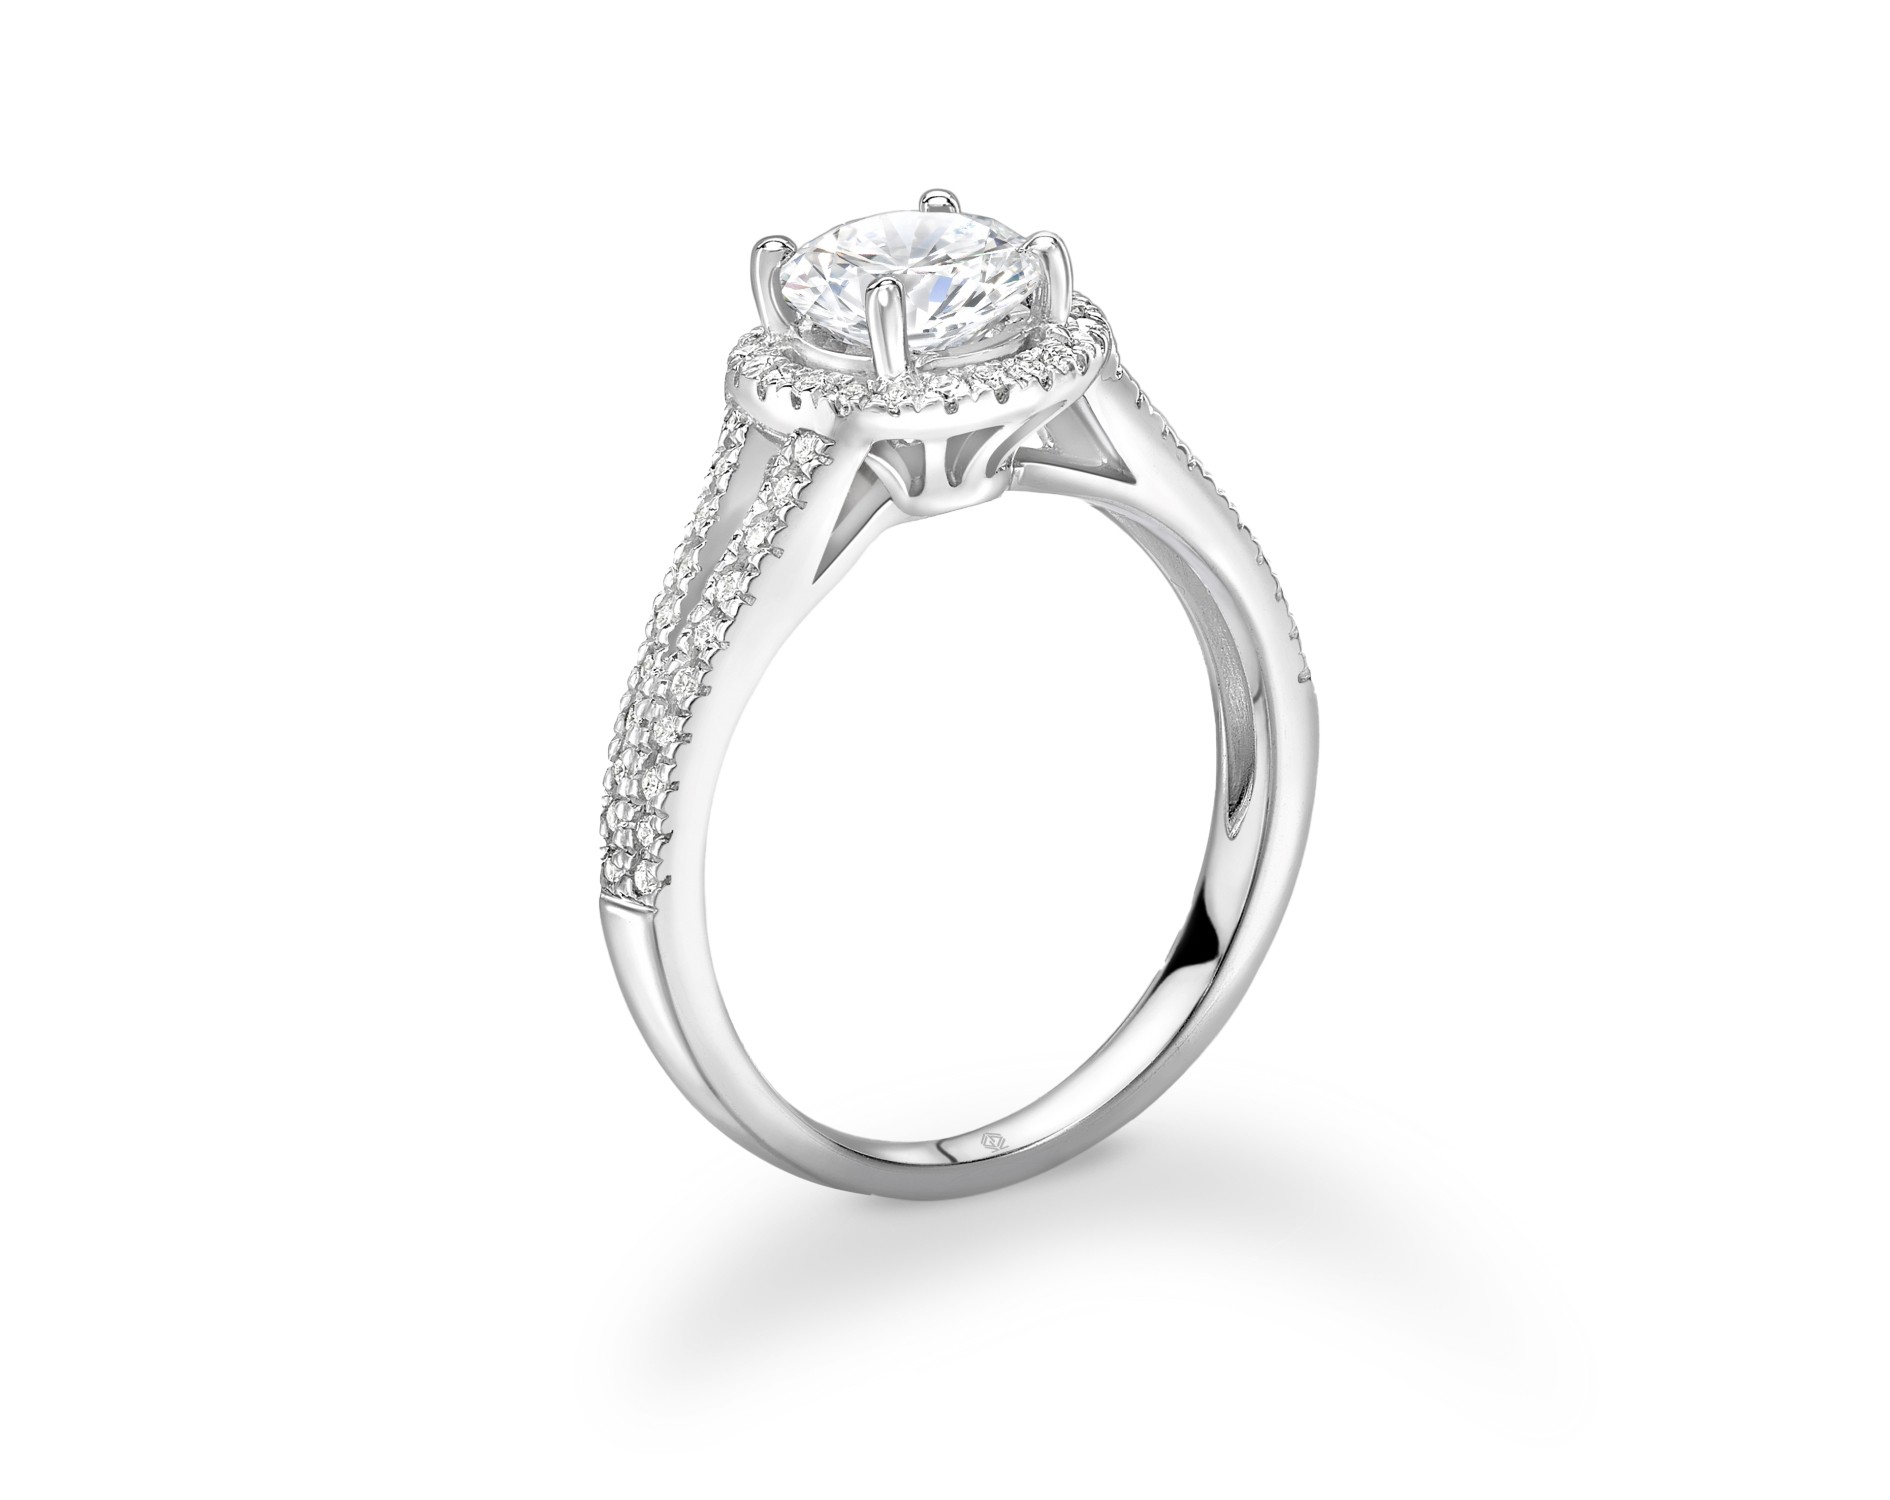 18K WHITE GOLD HALO DIAMOND ENGAGEMENT RING WITH SPLIT SHANKS IN PAVE SET